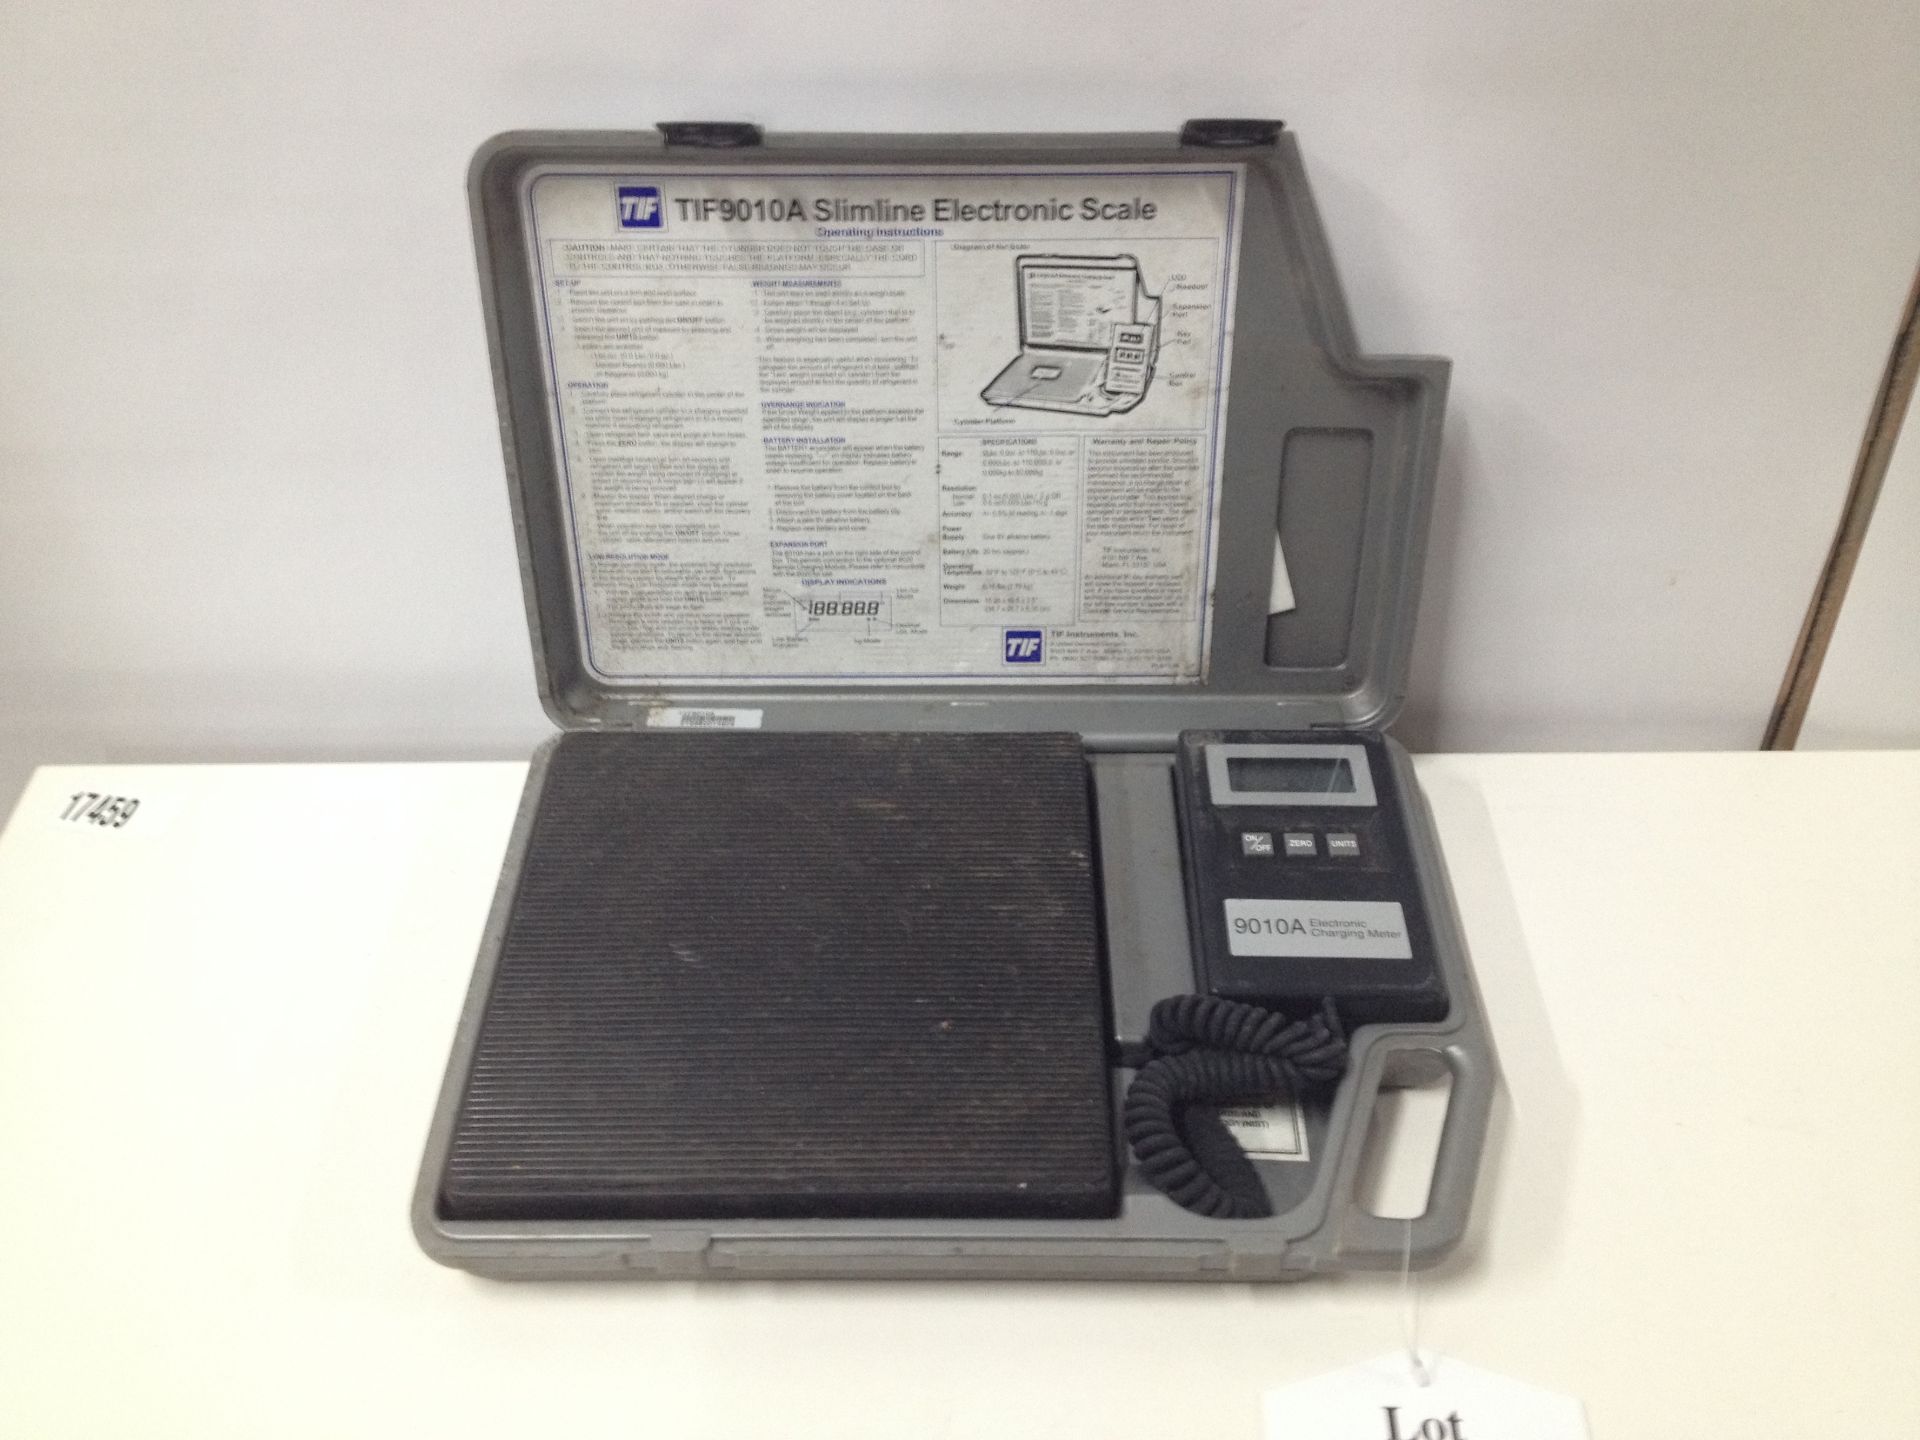 Site Slimline Electronic Scales - Image 2 of 4